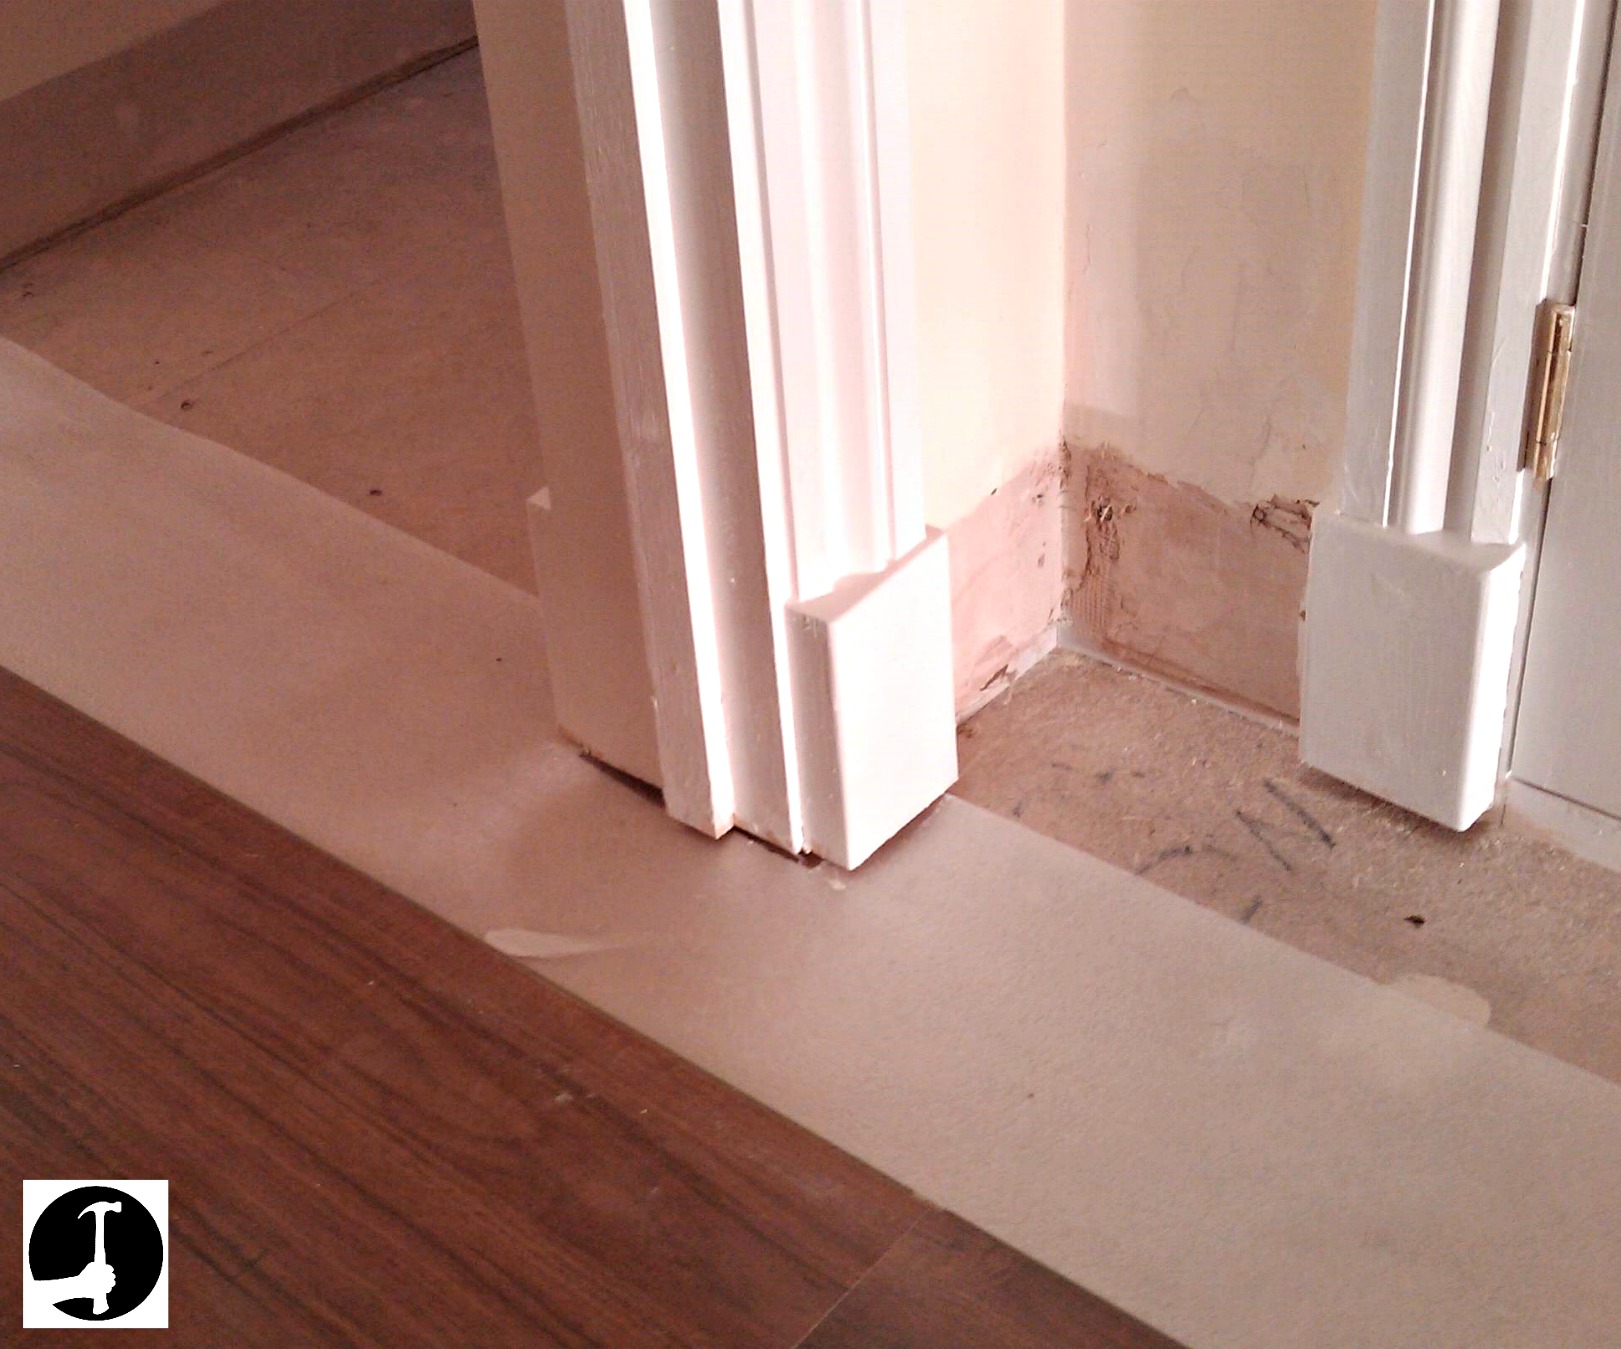 How To Lay Laminate In A Doorway For Perfect Flooring Transitions